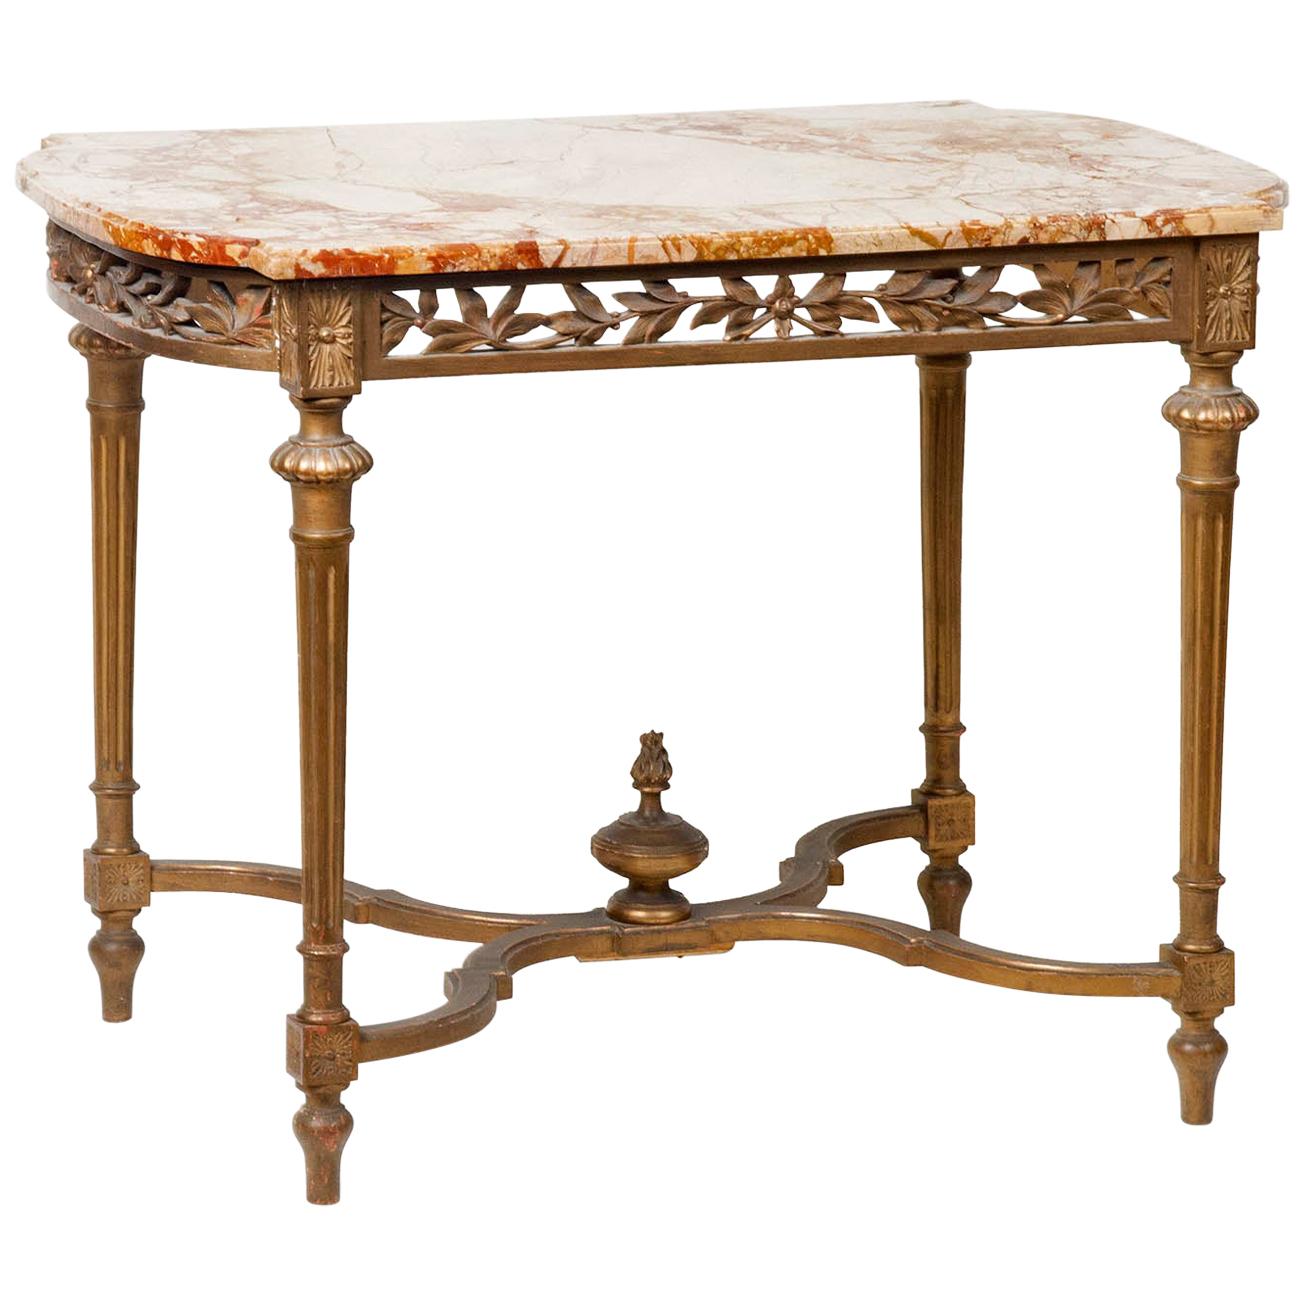 19th Century French Centre Table with Montmeyan Breccia Marble Top